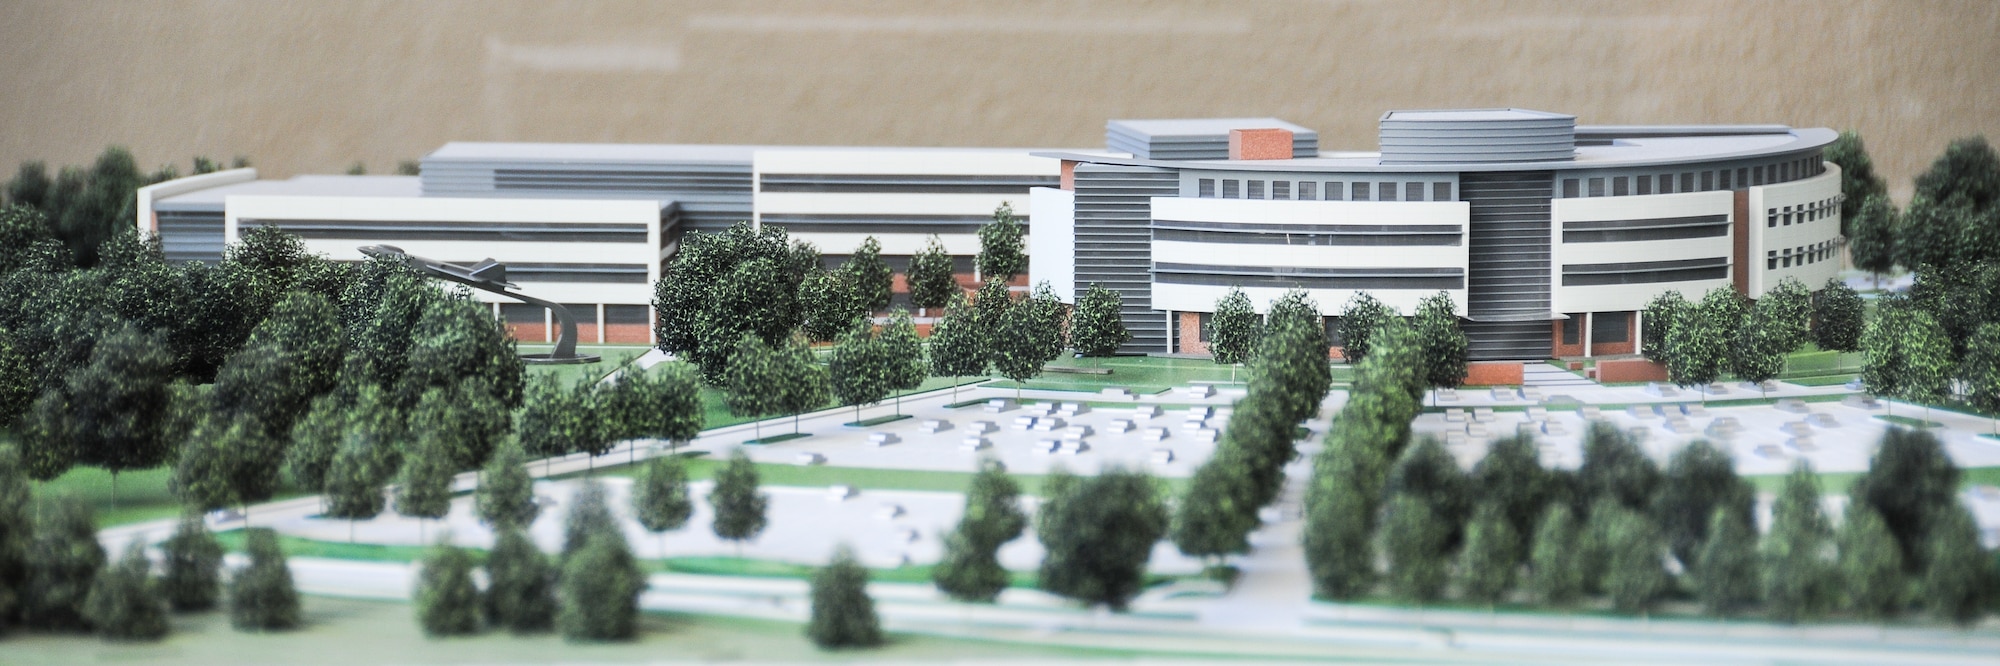 The model of the new Headquarters Air Force Reserve Complex is on display in the current headquarters building. The model was unveiled Nov. 13, 2012, on Robins Air Force Base, Ga. (U.S. Air Force photo/Staff Sgt. Alexy Saltekoff)